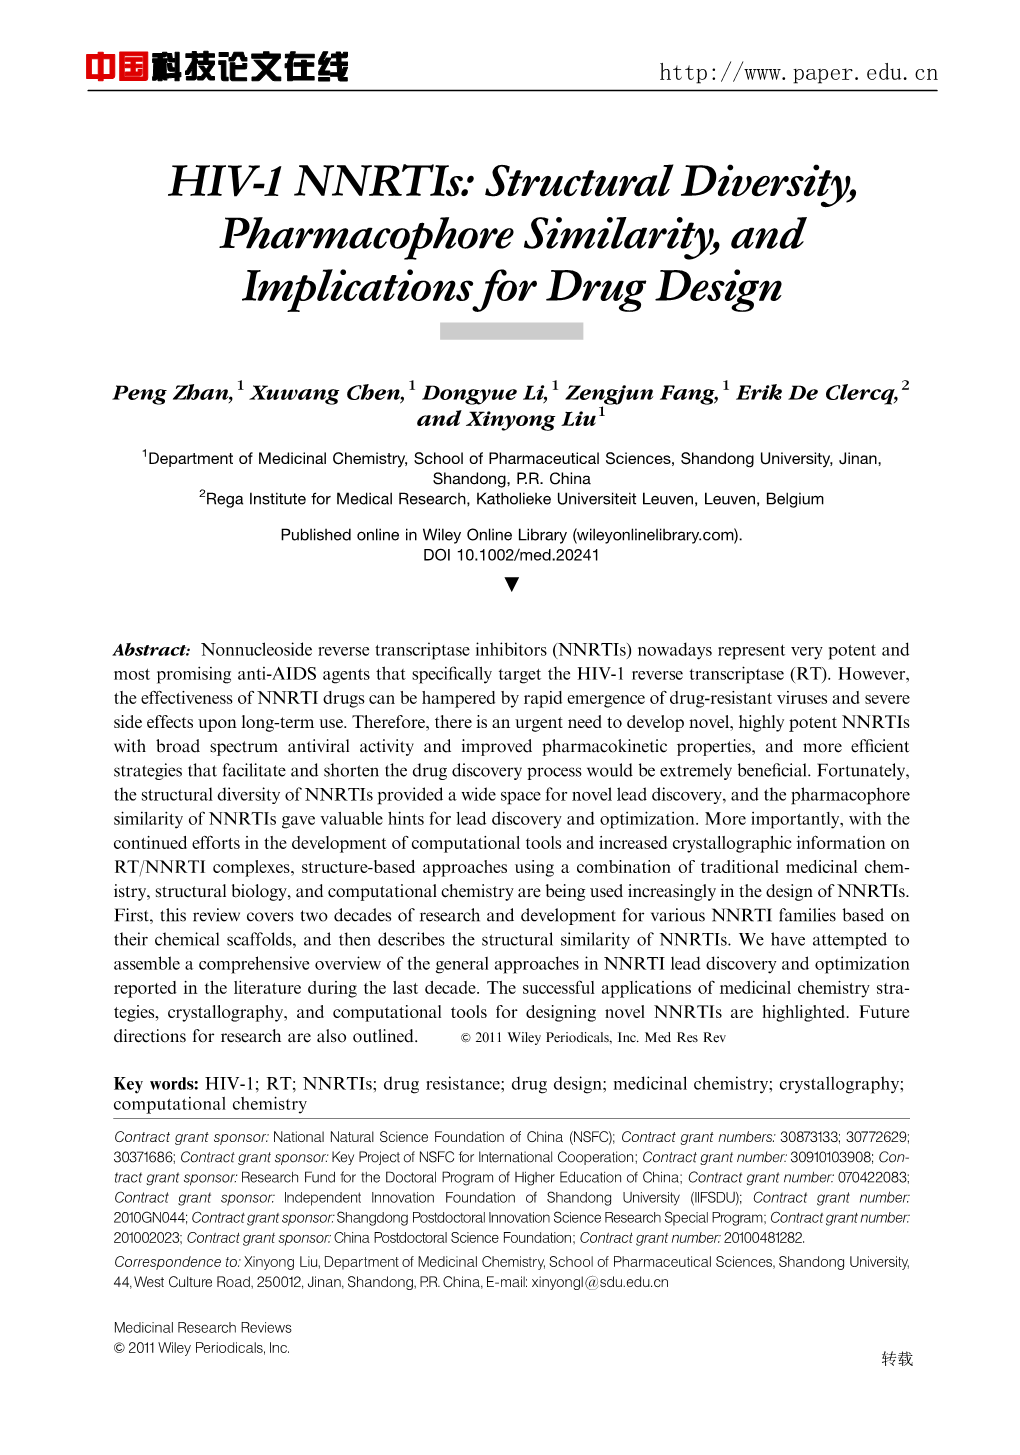 HIV-1 Nnrtis: Structural Diversity, Pharmacophore Similarity, and Implications for Drug Design